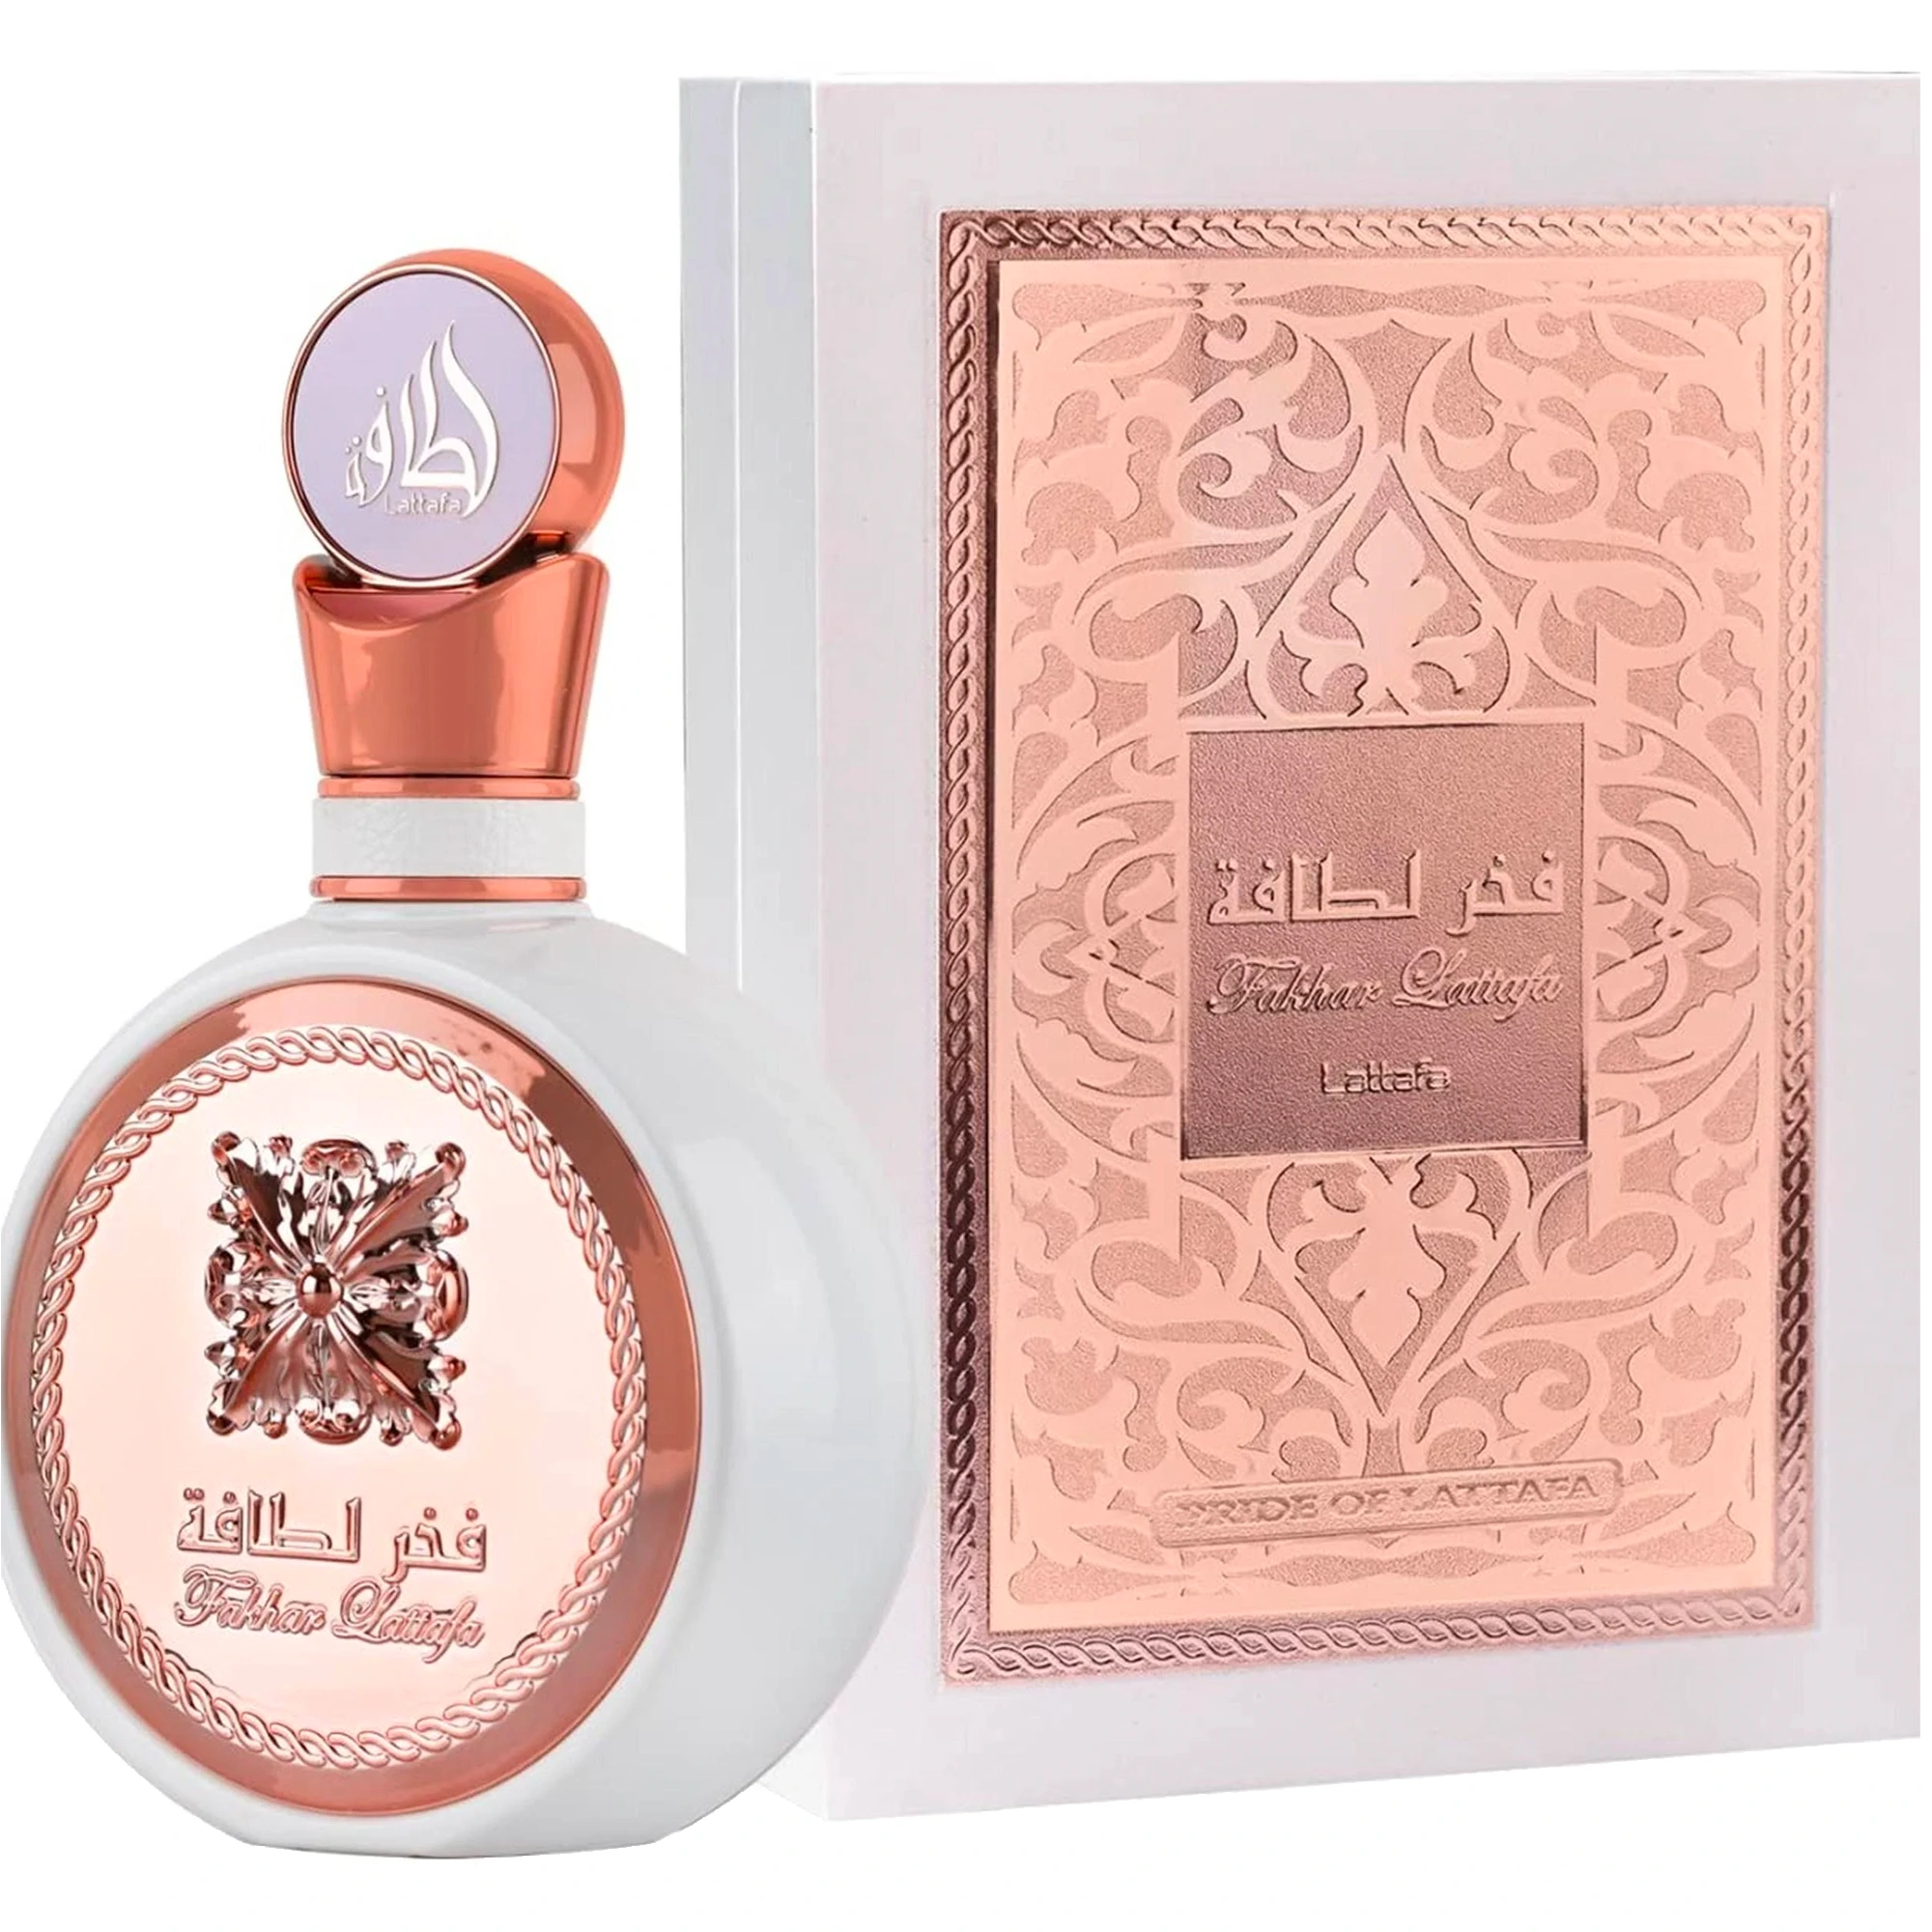 <div data-mce-fragment="1">
<p><em>﻿INSPIRED BY </em><strong>﻿GIVENCHY L'INTERDIT</strong><br></p>
<p>Introduced in 2022 Fakhar Rose is an exquisite Floral fragrance for women, composed by top notes of Fruits, Lily, Pomegranate and Aldehydes, and mellowed with middle notes of Tuberose, Jasmine, Gardenia, Honeysuckle, Ylang-Ylang, Rose and Peony. The scent is finished off with Vanilla, Ambroxan, White Musk and Sandalwood notes, creating a captivating and memorable scent experience.</p>
</div>